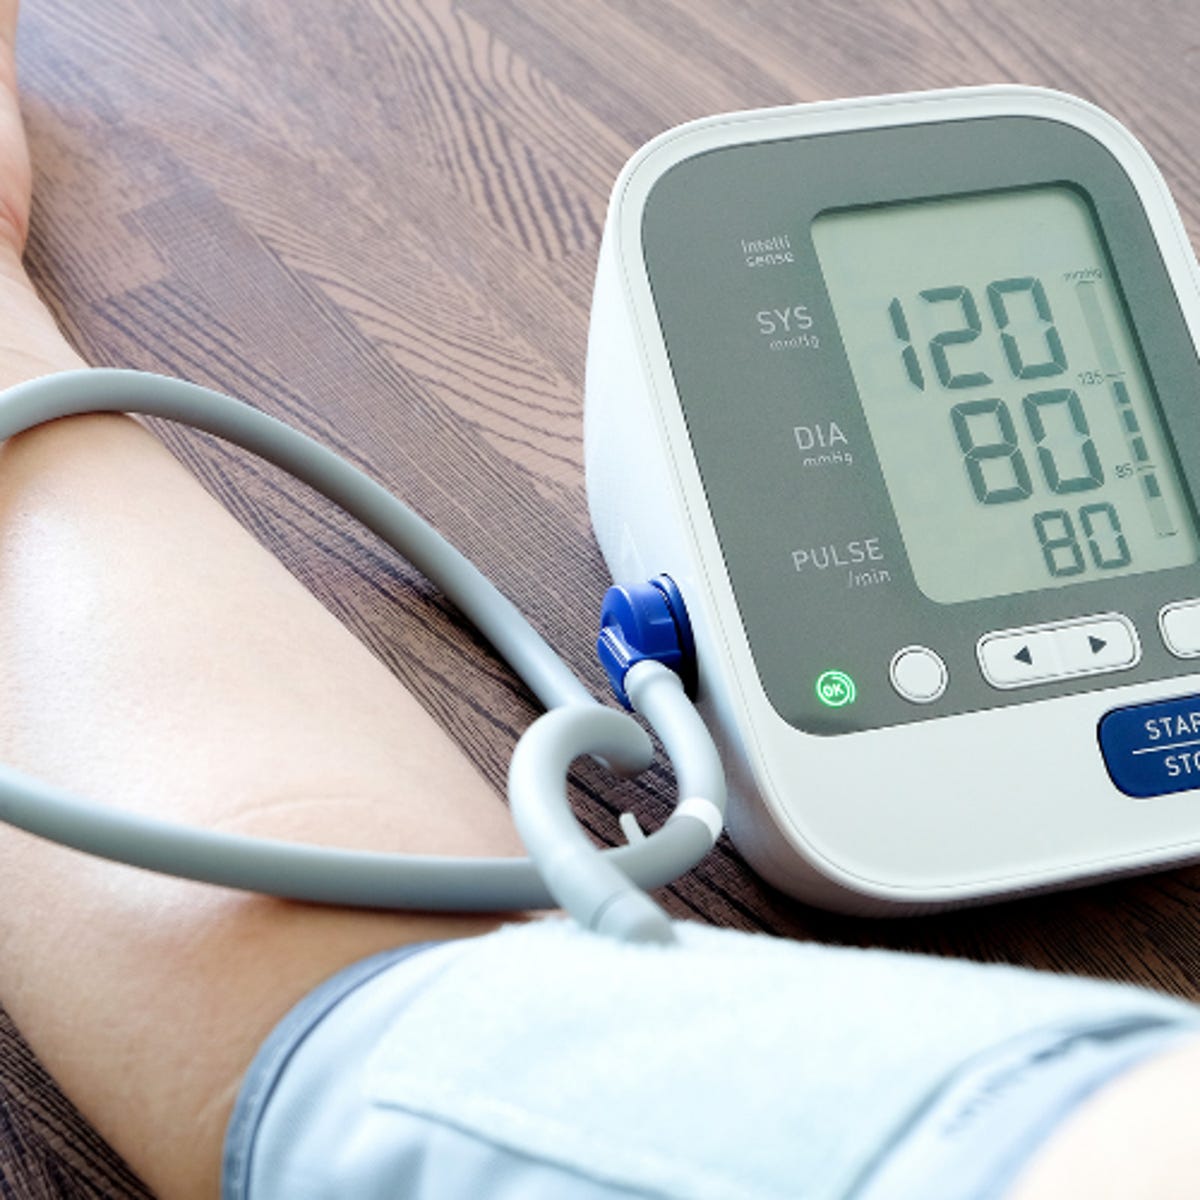 How to take your blood pressure at home - CNET